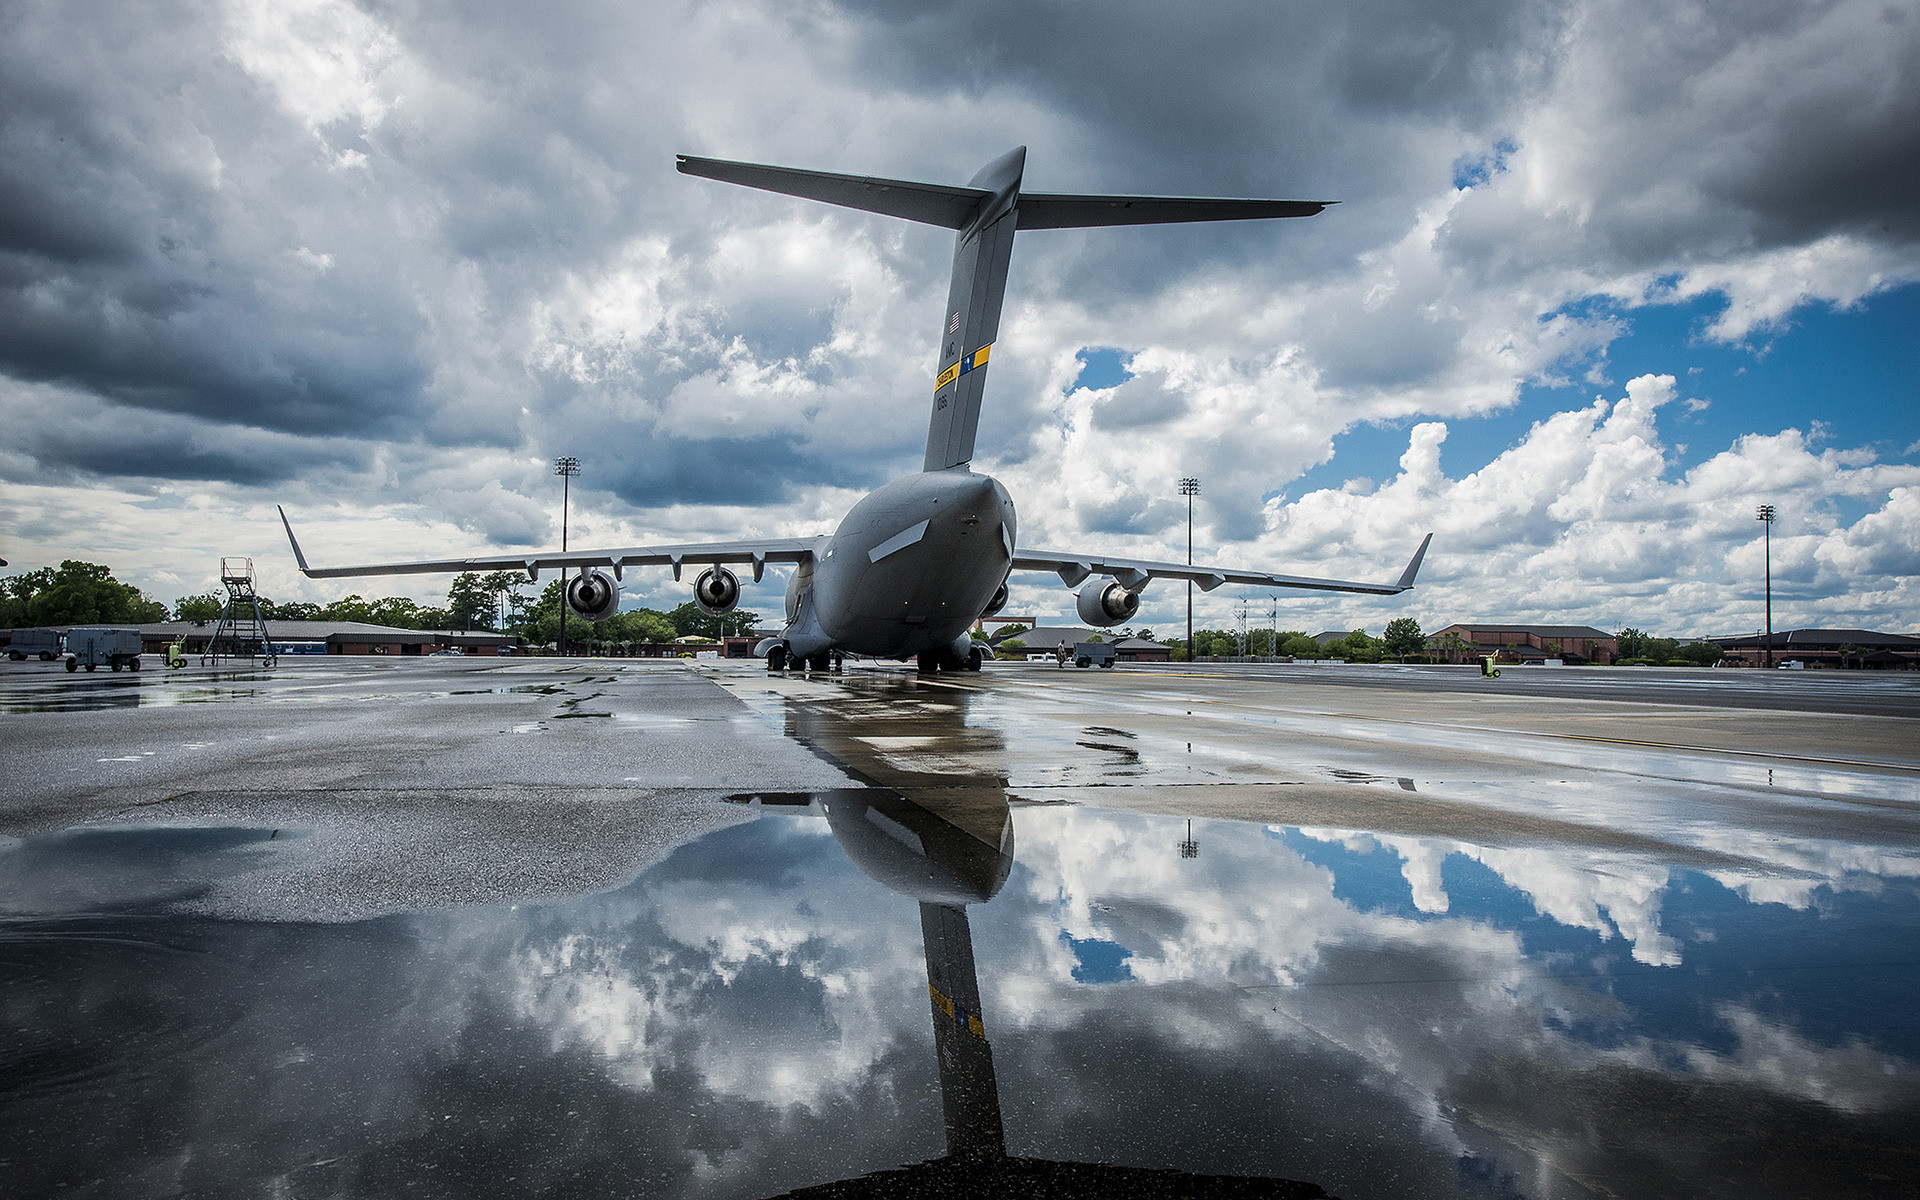 Desktop Wallpaper Boeing C 17 Globemaster Iii Military Transport Aircraft  Airplane Hd Image Picture Background P8xhf